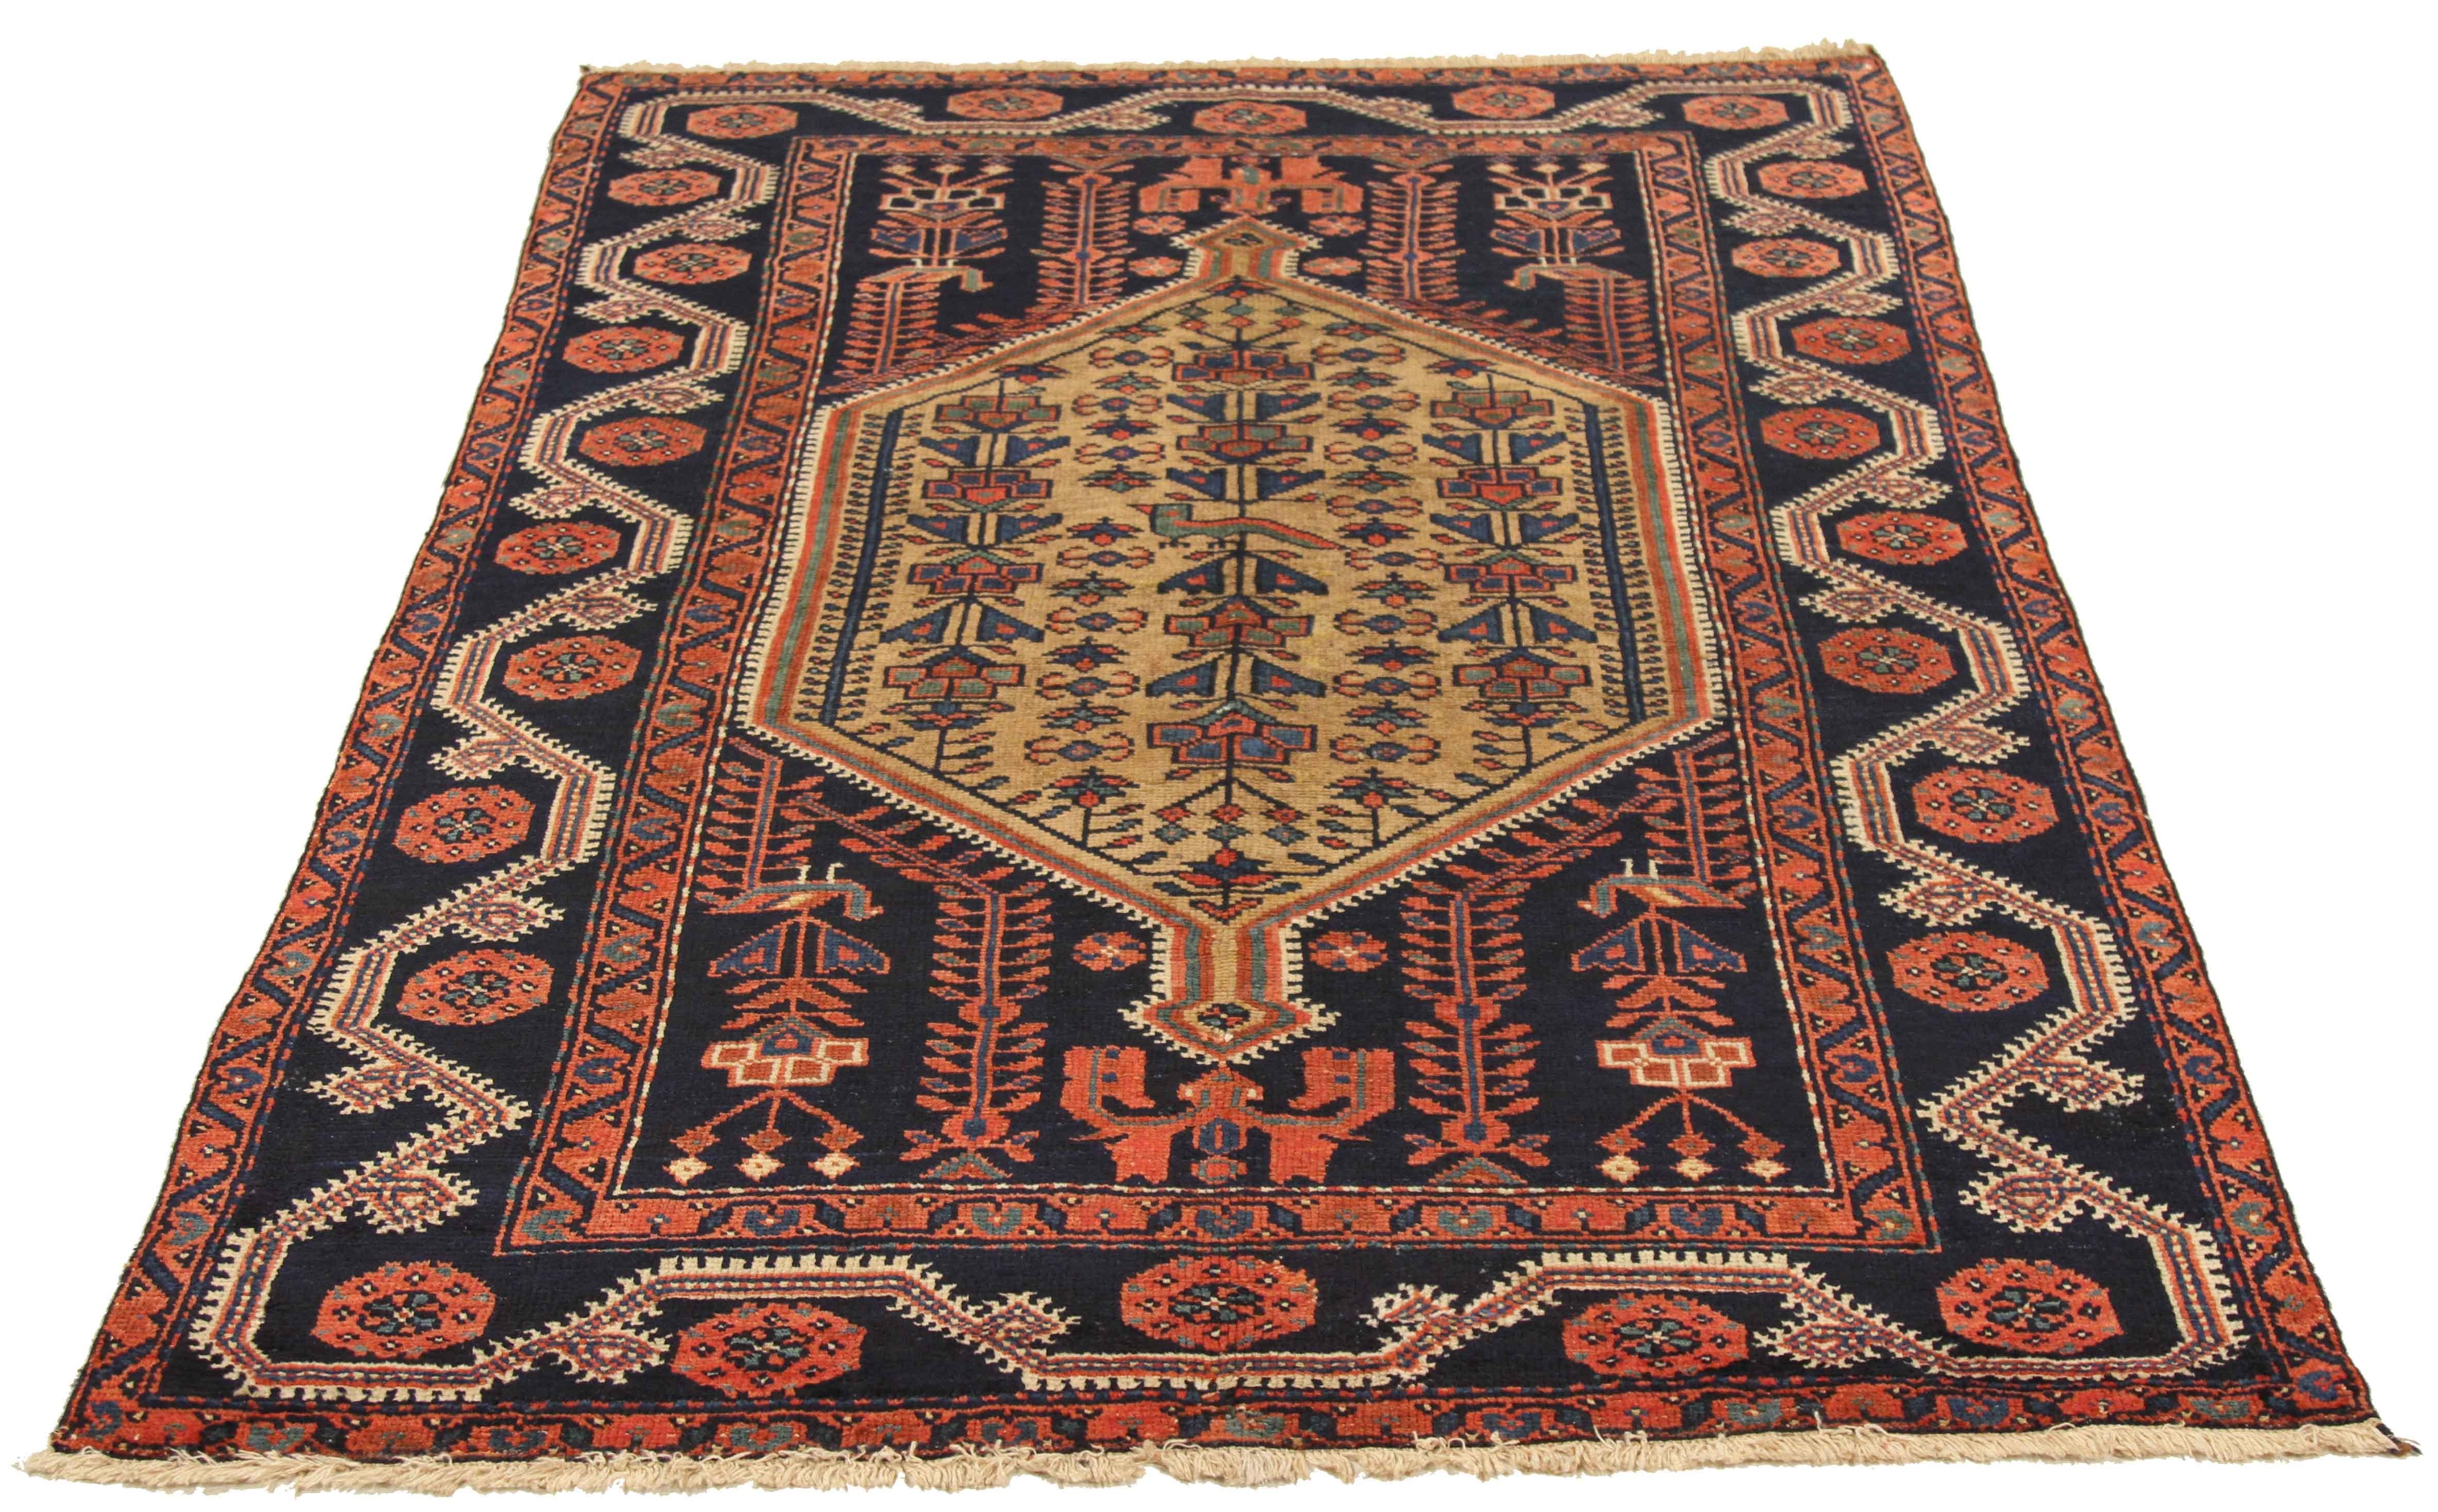 Antique Russian rug handwoven from the finest sheep’s wool and colored with all-natural vegetable dyes that are safe for humans and pets. It’s woven using Khotan design featuring rows of octagon shaped medallions in ivory and black over red field.